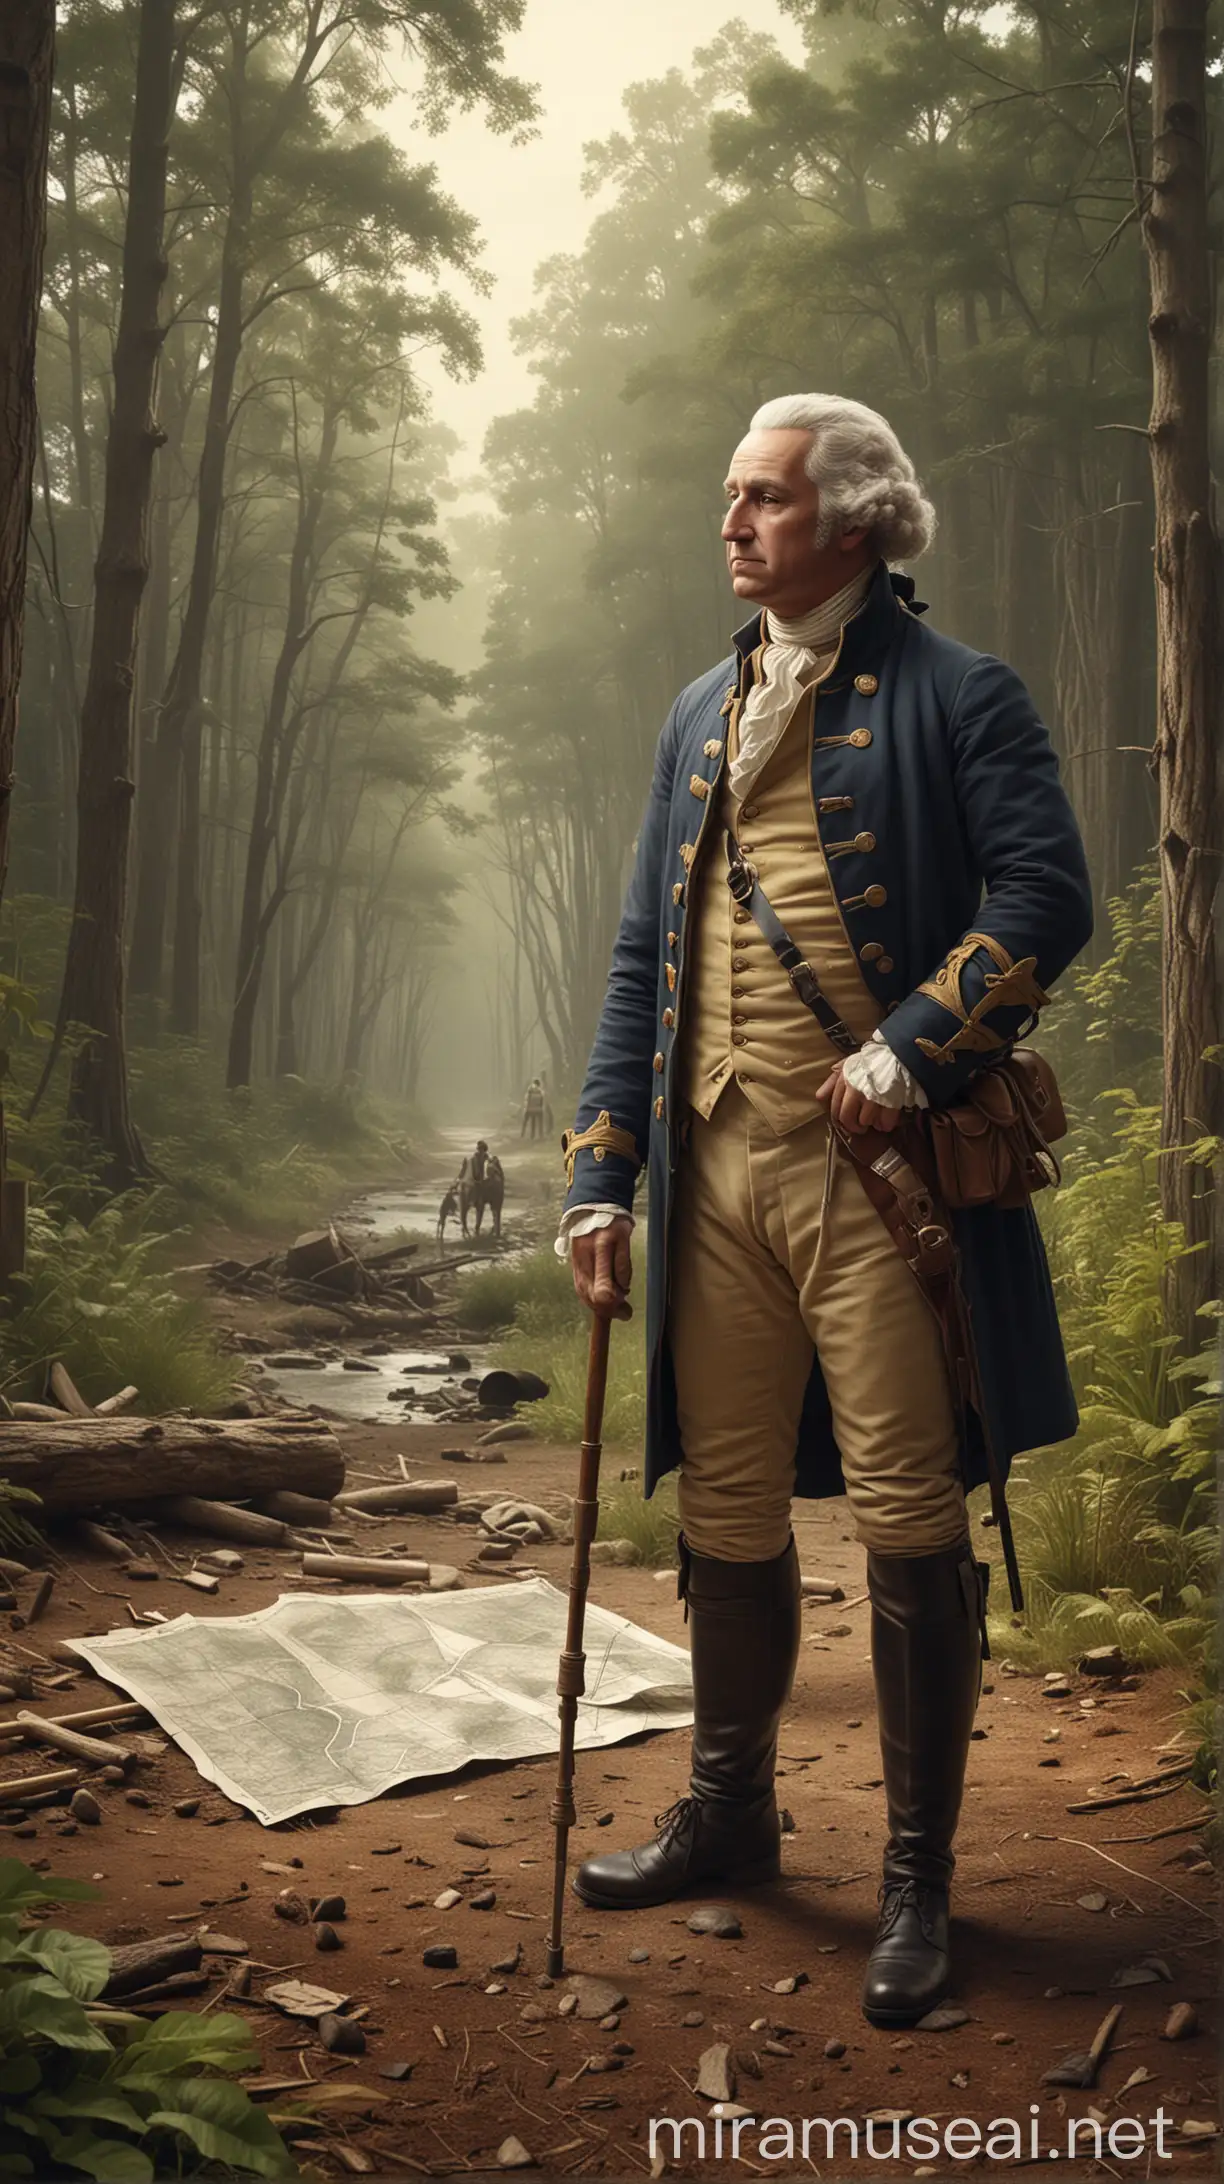 Depict George Washington working as a land surveyor, exploring and mapping out new territories. hyper realistic